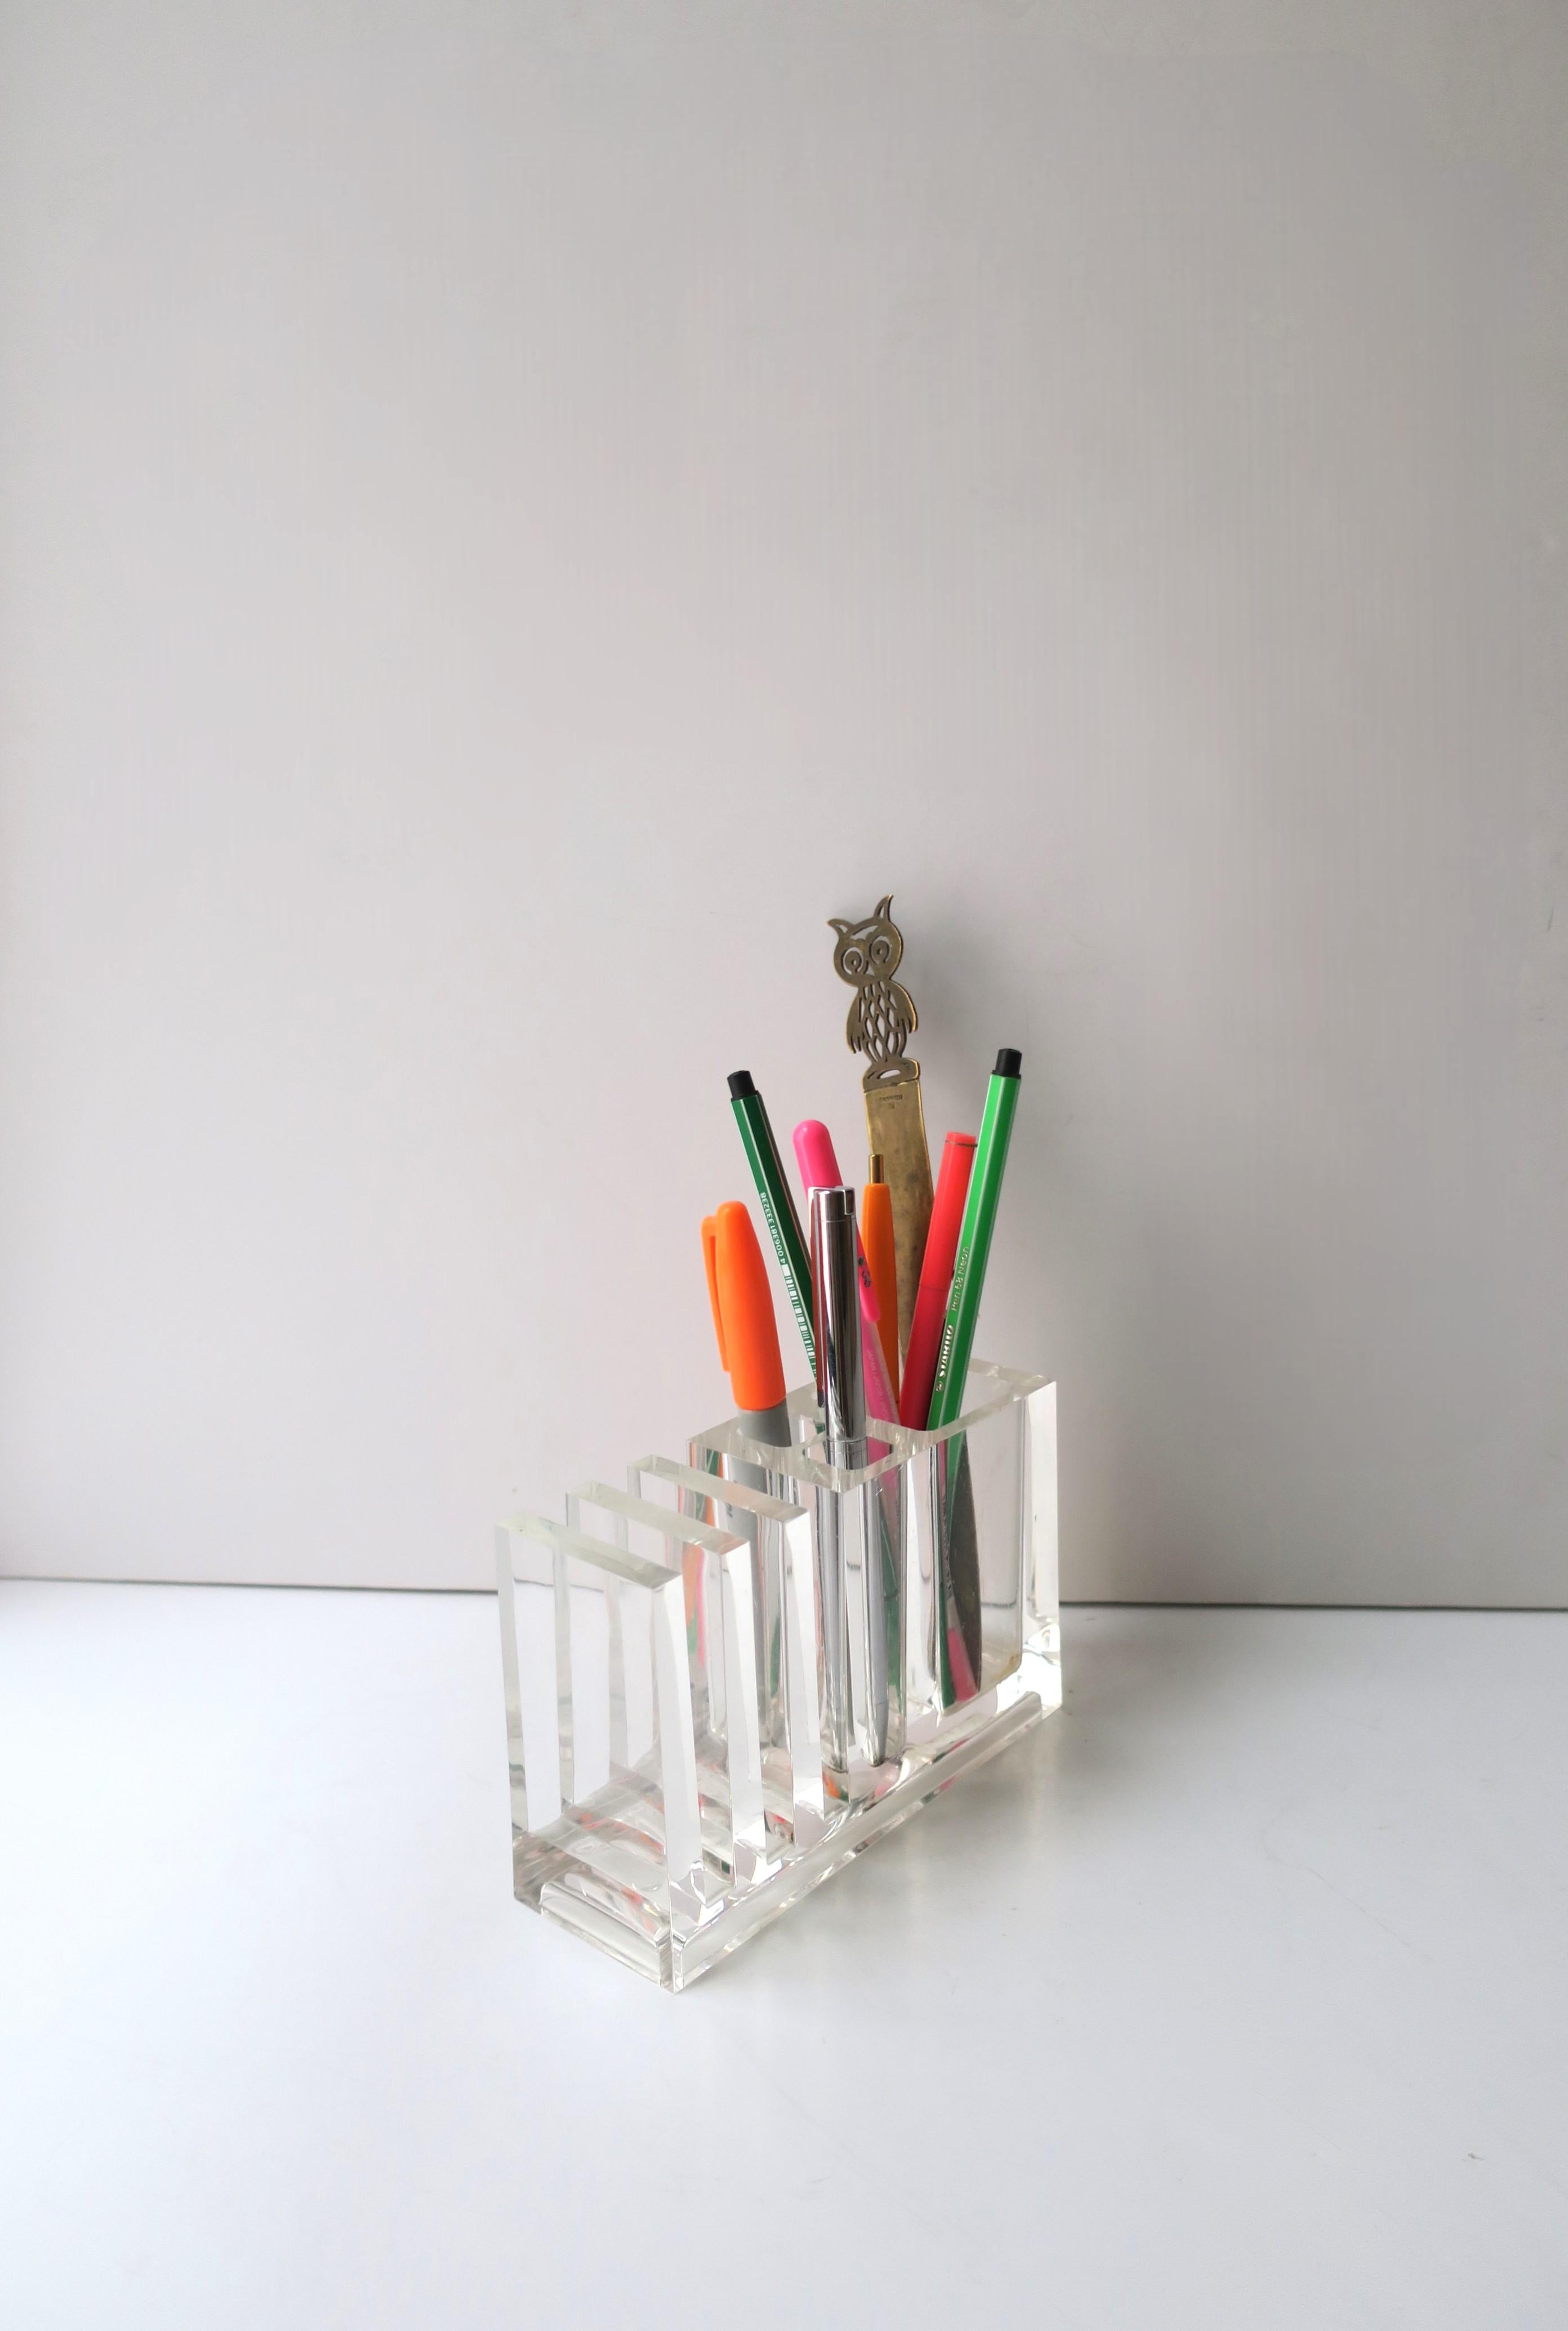 An Italian Lucite pen, pencil, marker and small paper desk organizer/holder, Postmodern period or Modern style, by designer Rede Guzzini, circa 1980s, Italy. A great desk accessory as demonstrated holding pens, markers, letter opener, and post card.